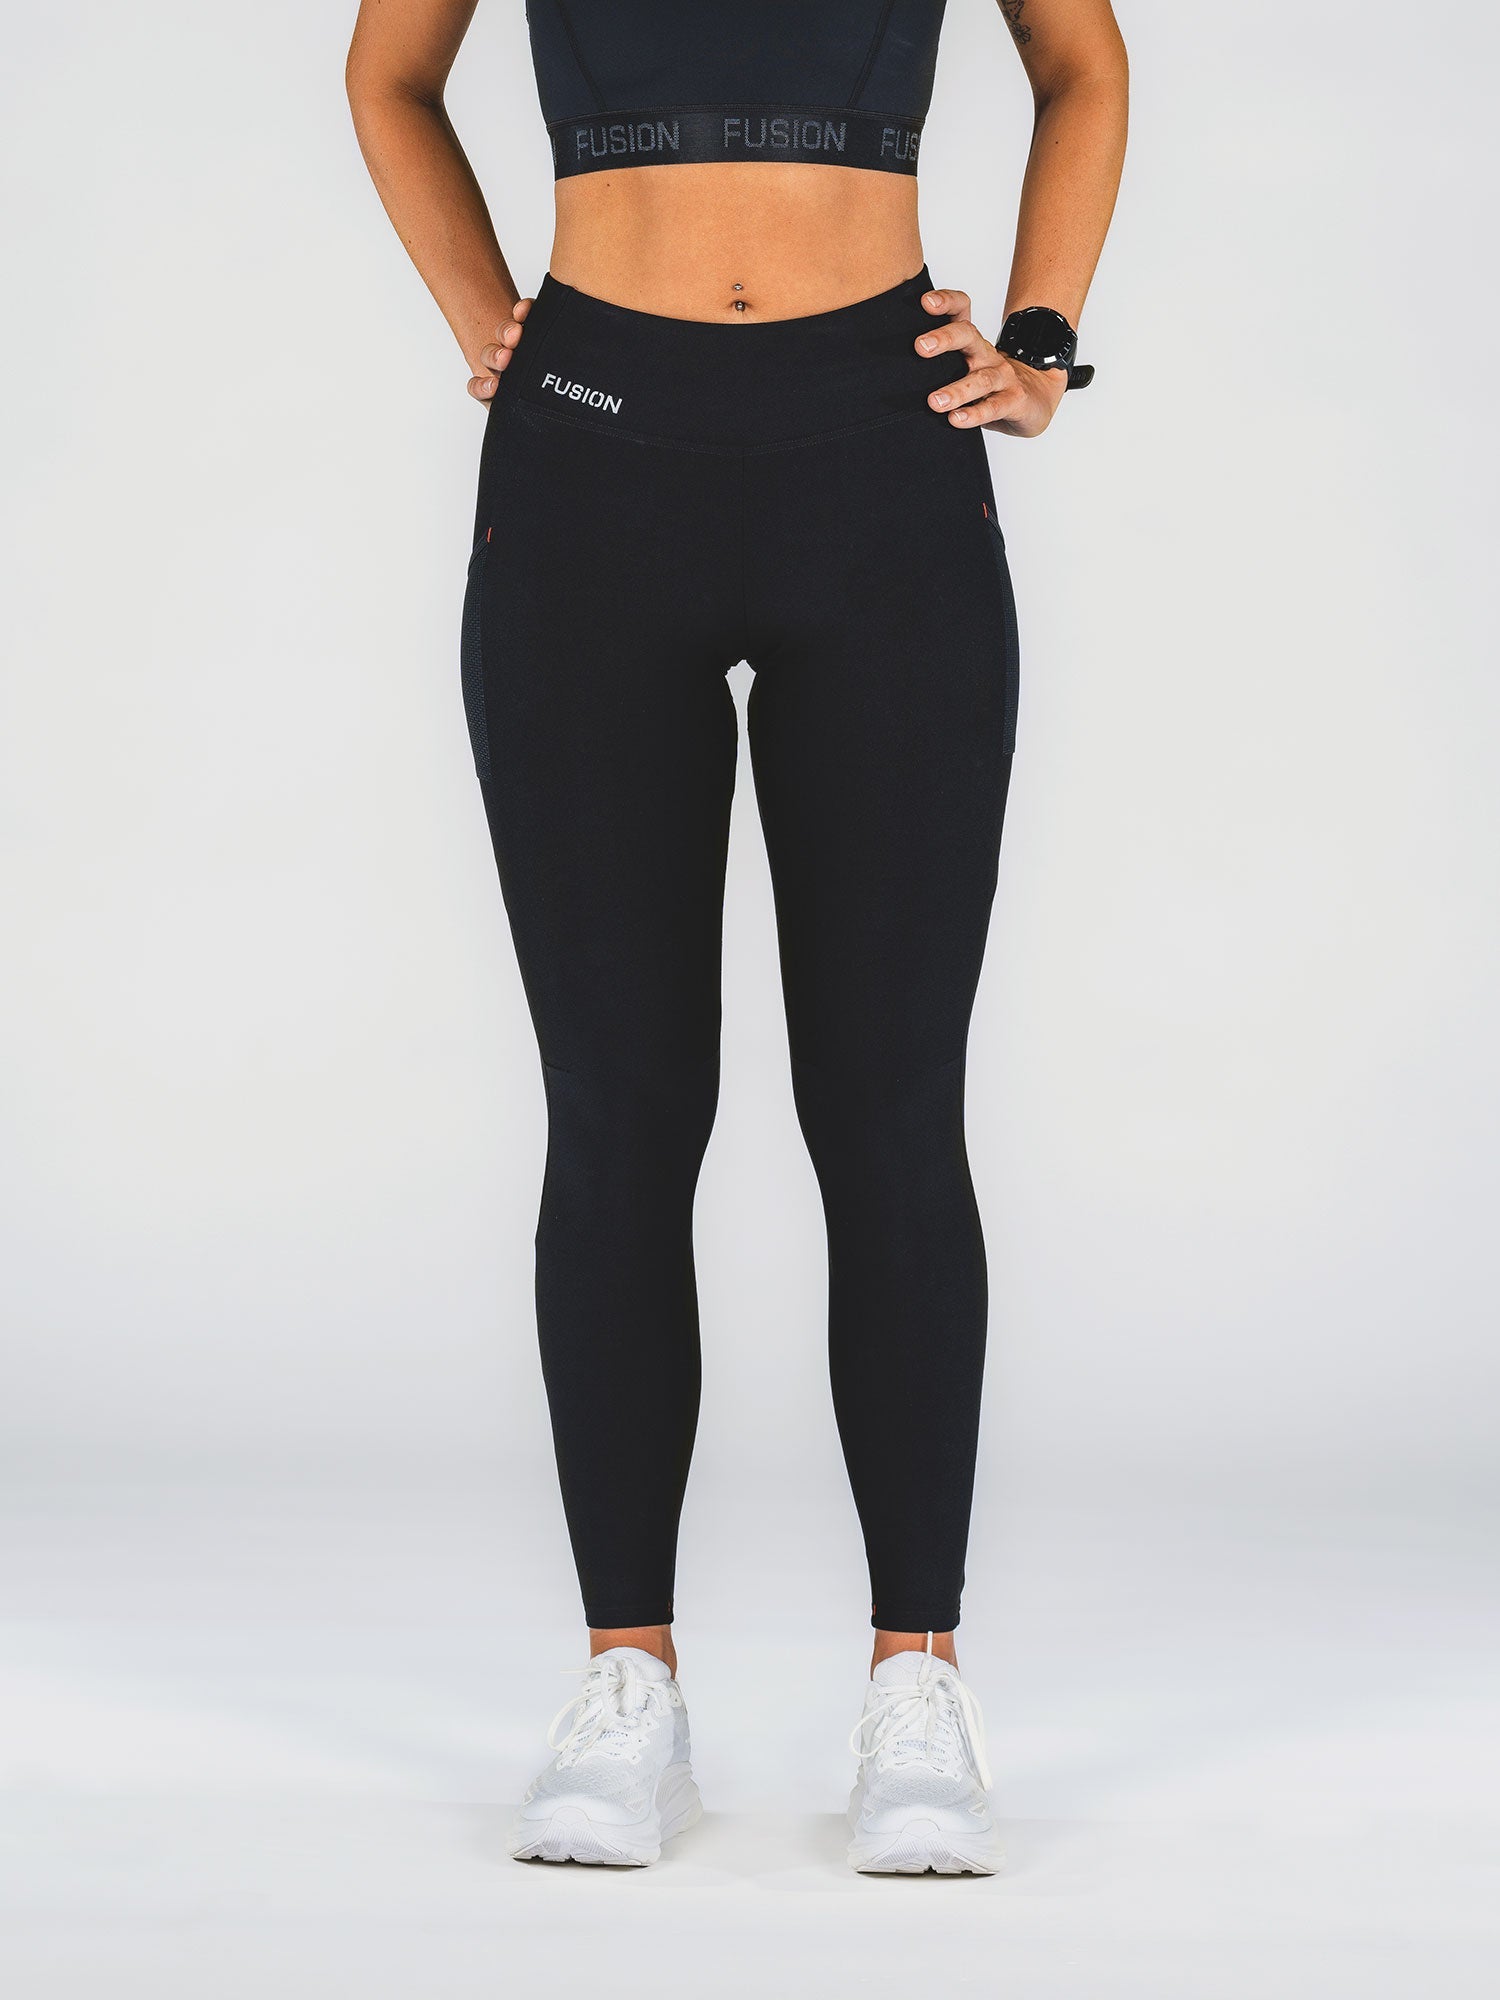 Womens Gym Tights - Squat-proof training tights for women